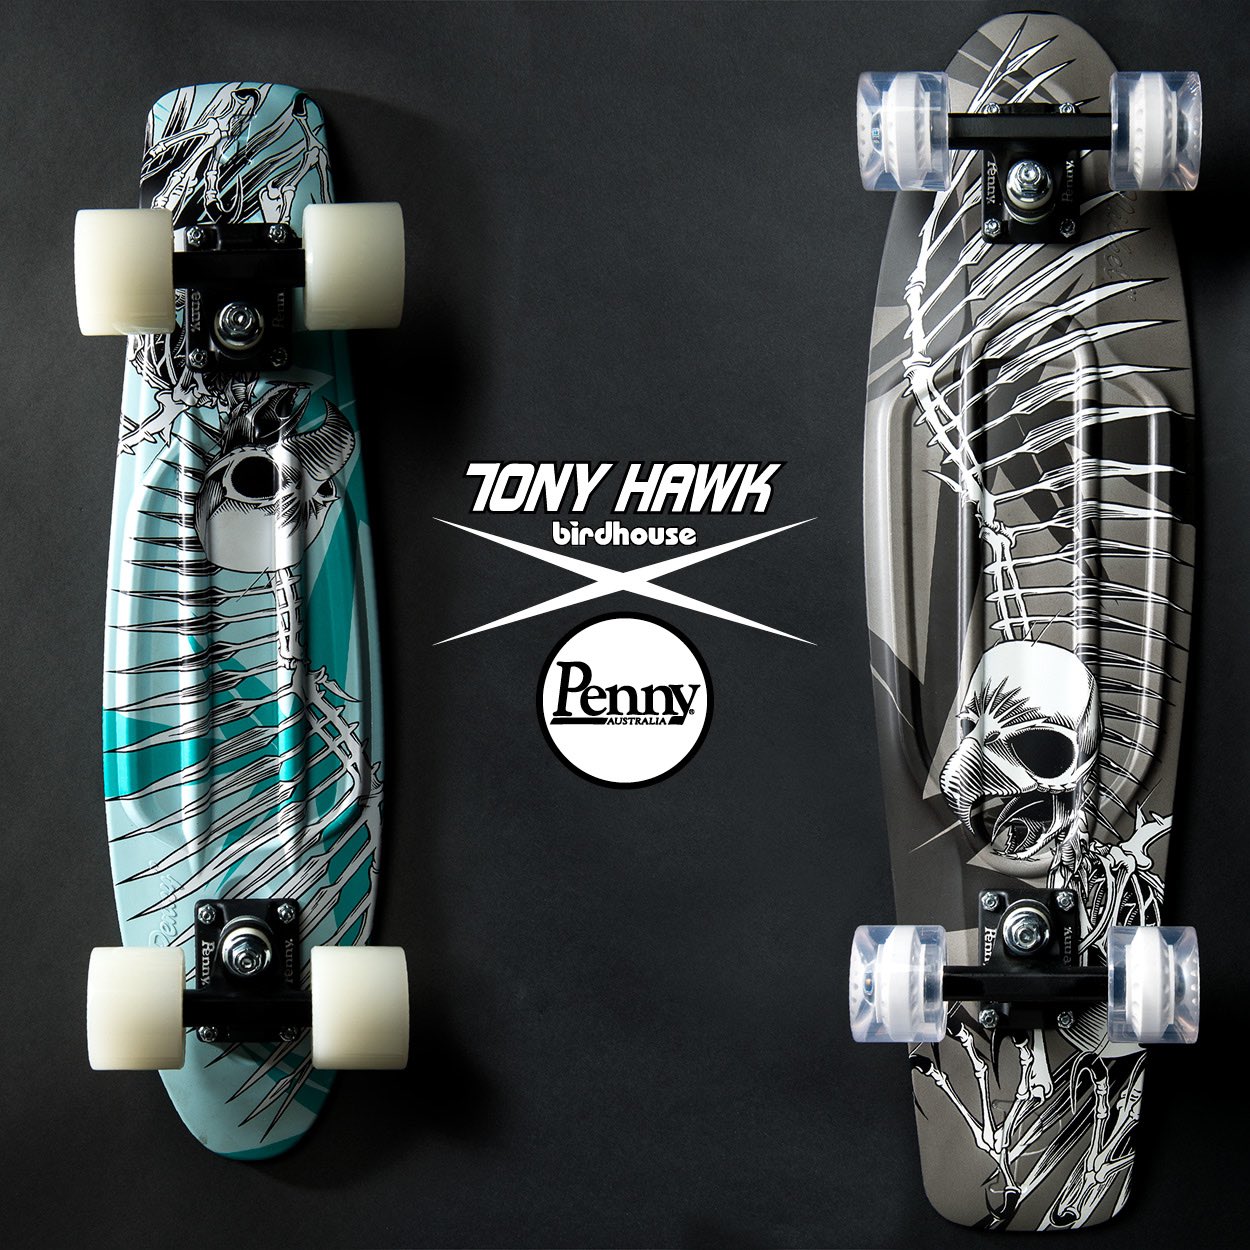 Tony on limited edition TH @pennyskateboard are available now, with % of proceeds going to @THF. Get a cruiser &amp; help public skateparks https://t.co/OWHGujrbxD" / Twitter